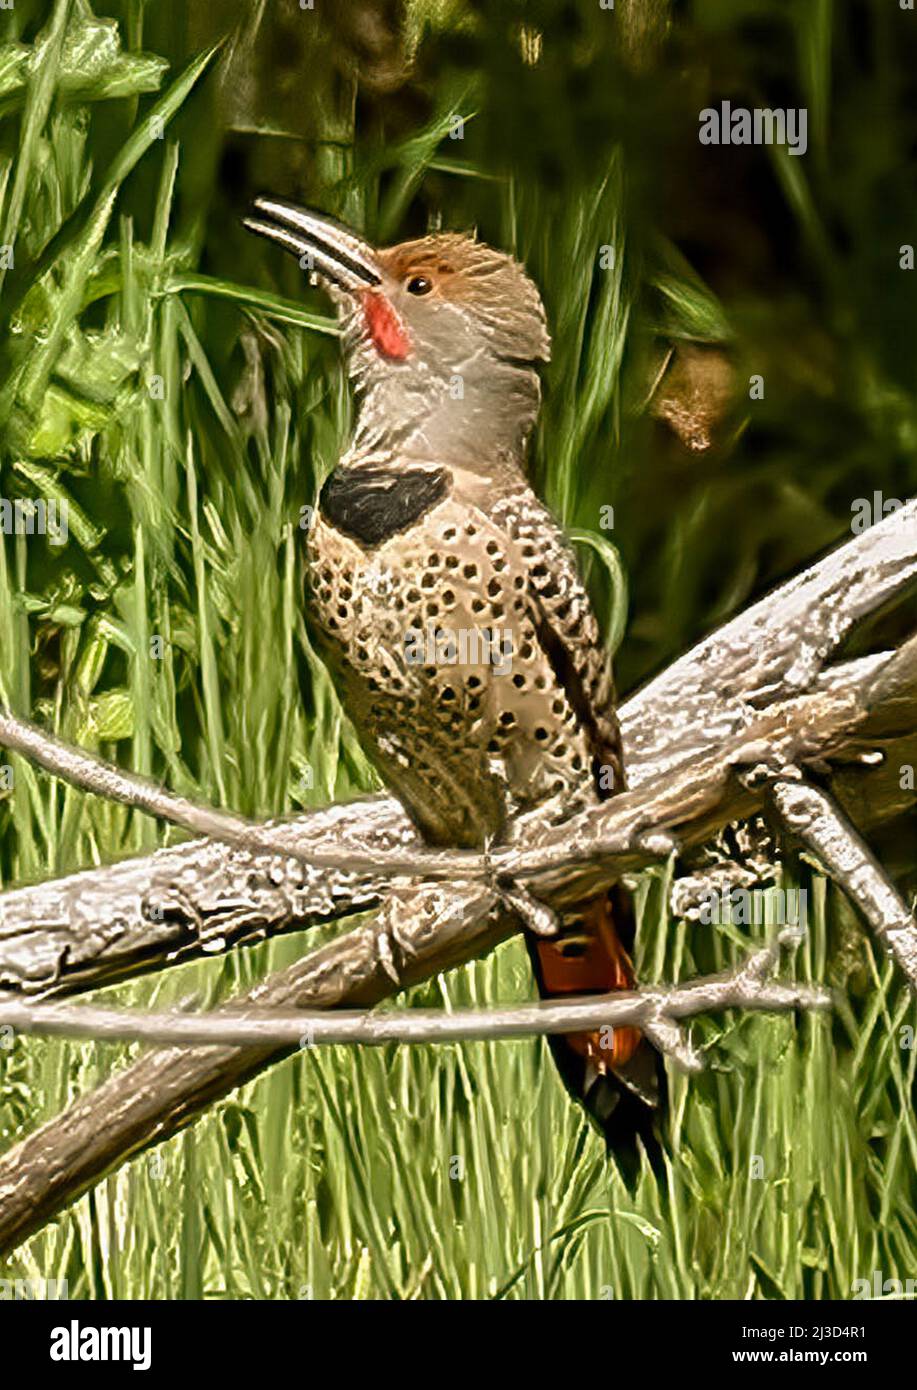 San Jose, California, USA, 7th April  2022: The northern flicker (Colaptes auratus) or common flicker is a medium-sized bird of the woodpecker family. It is native to most of North America, parts of Central America, Cuba, and the Cayman Islands, and is one of the few woodpecker species that migrate. Over 100 common names for the northern flicker are known, including yellowhammer (not to be confused with the Eurasian yellowhammer), clape, gaffer woodpecker, harry-wicket[citation needed], heigh-ho, wake-up, walk-up, wick-up, yarrup, and gawker bird. Many of these names derive from attempts to im Stock Photo